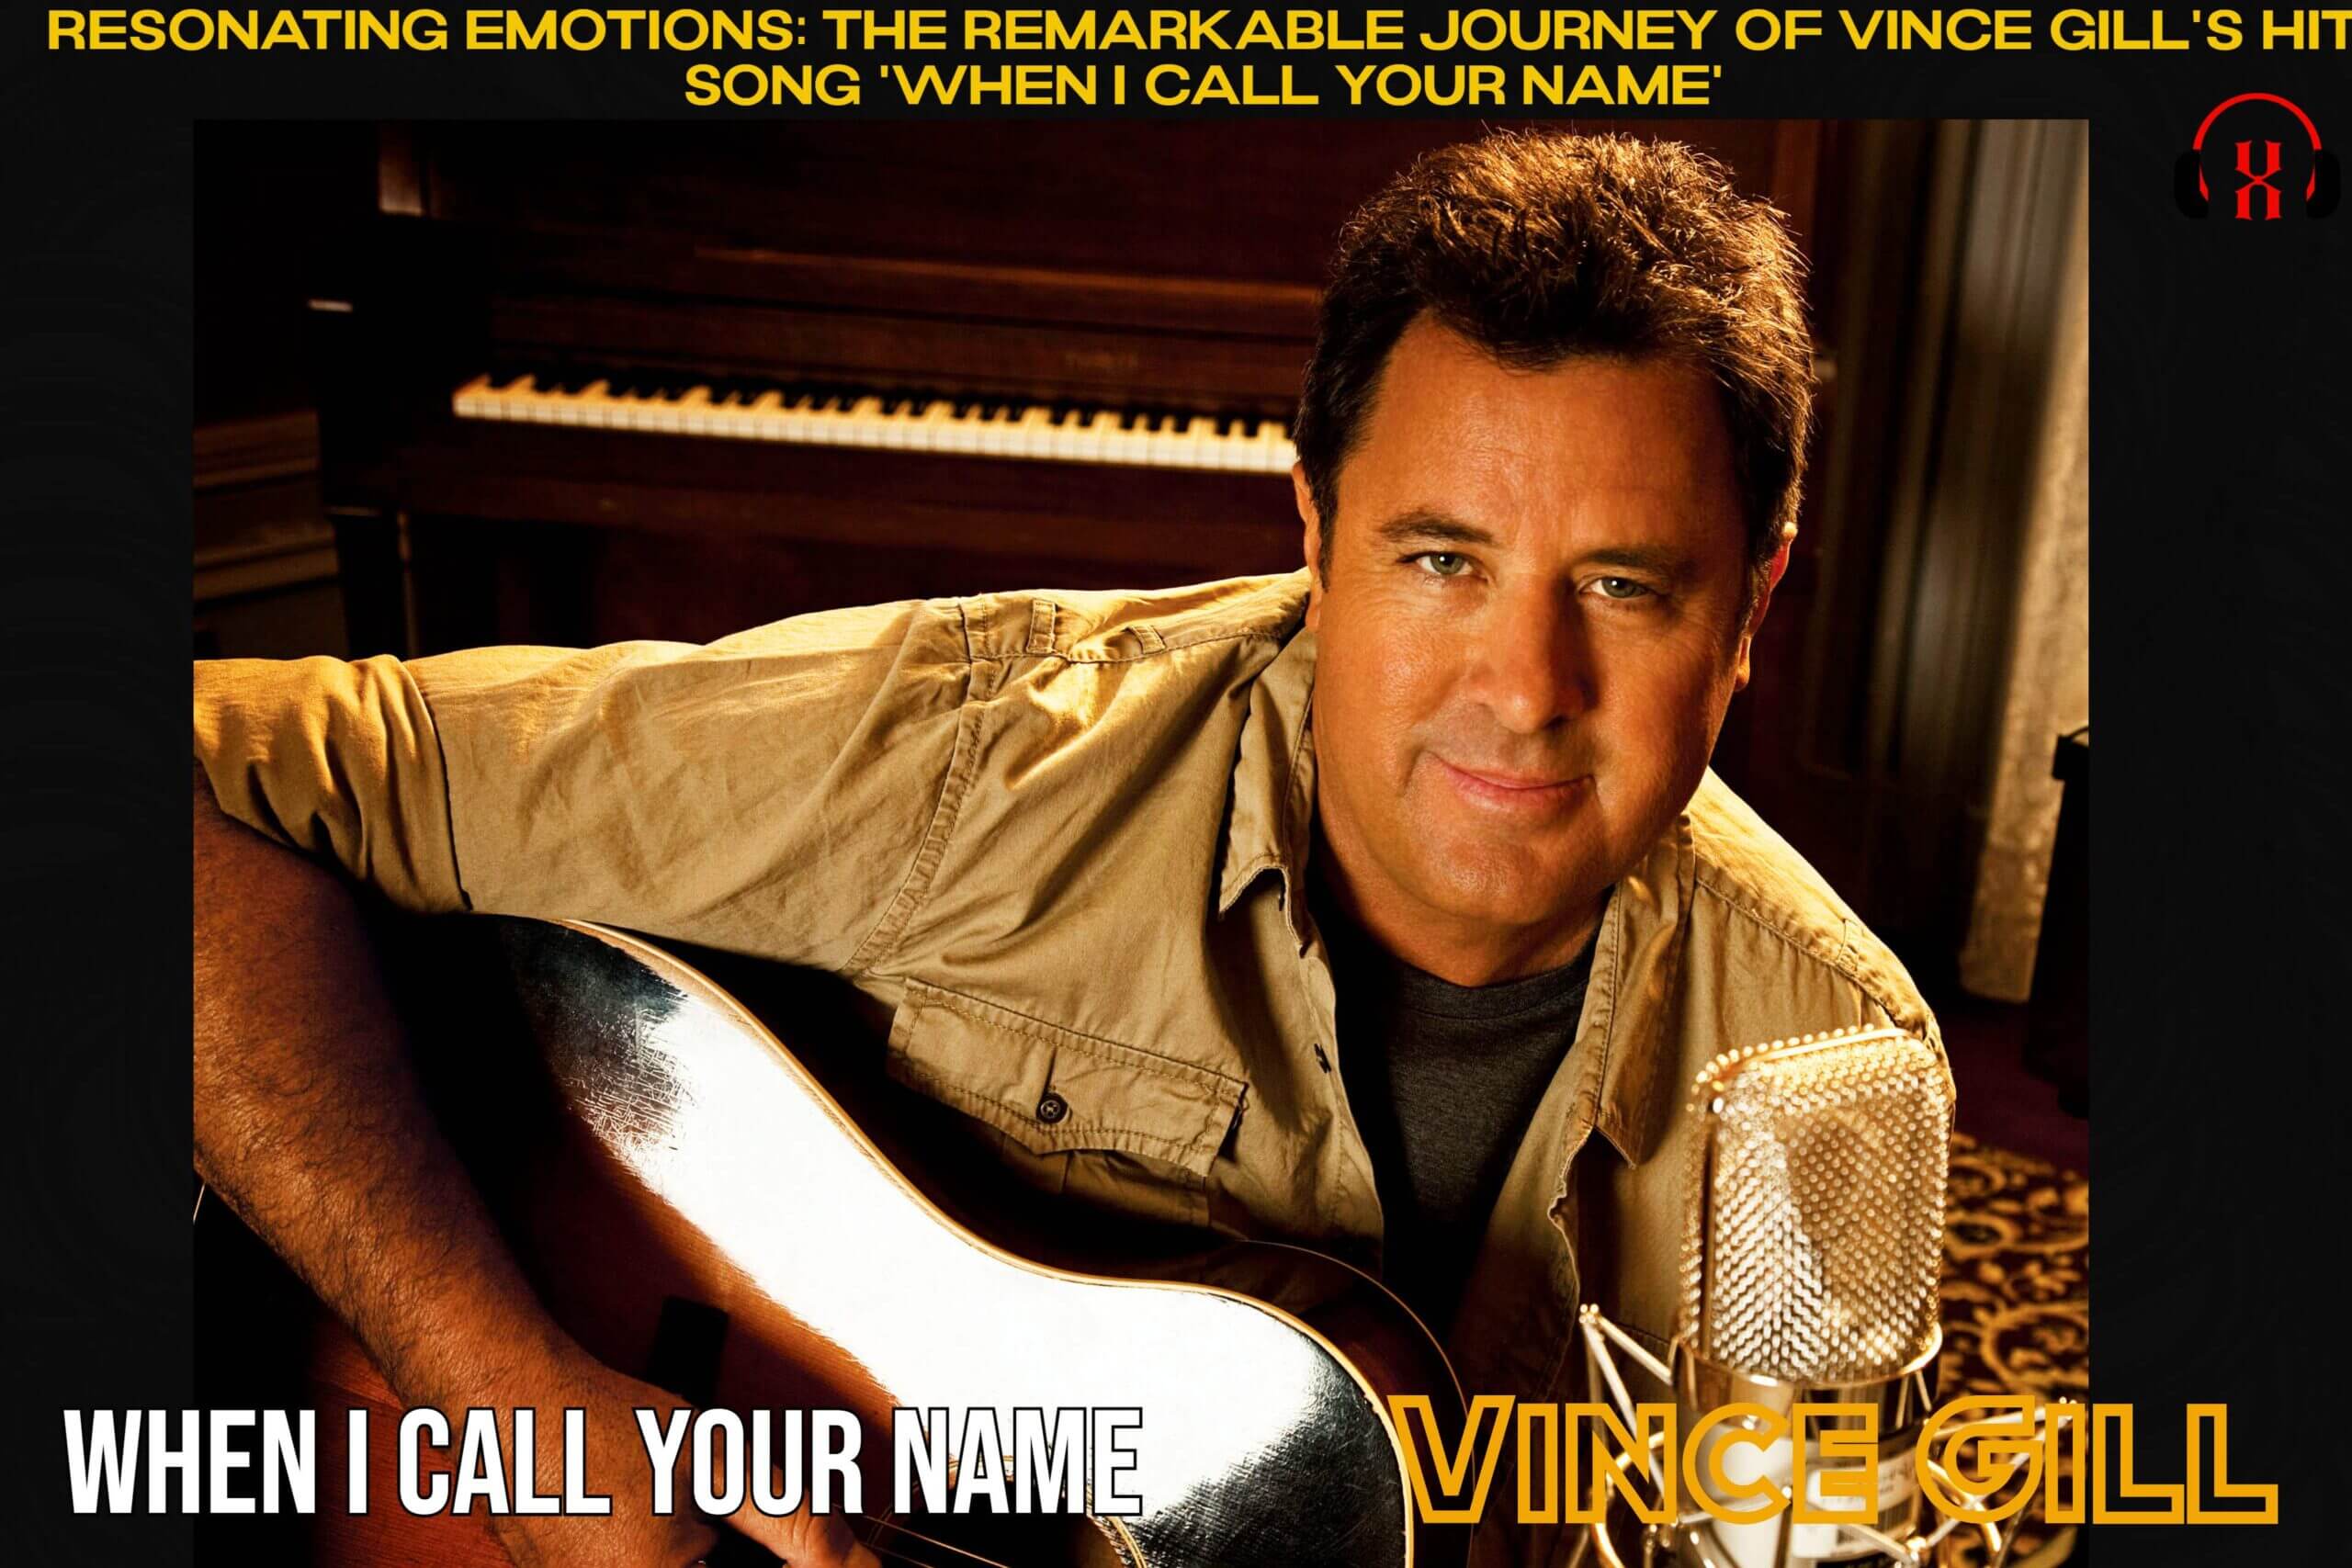 “Resonating Emotions: The Remarkable Journey of Vince Gill’s Hit Song ‘When I Call Your Name'”